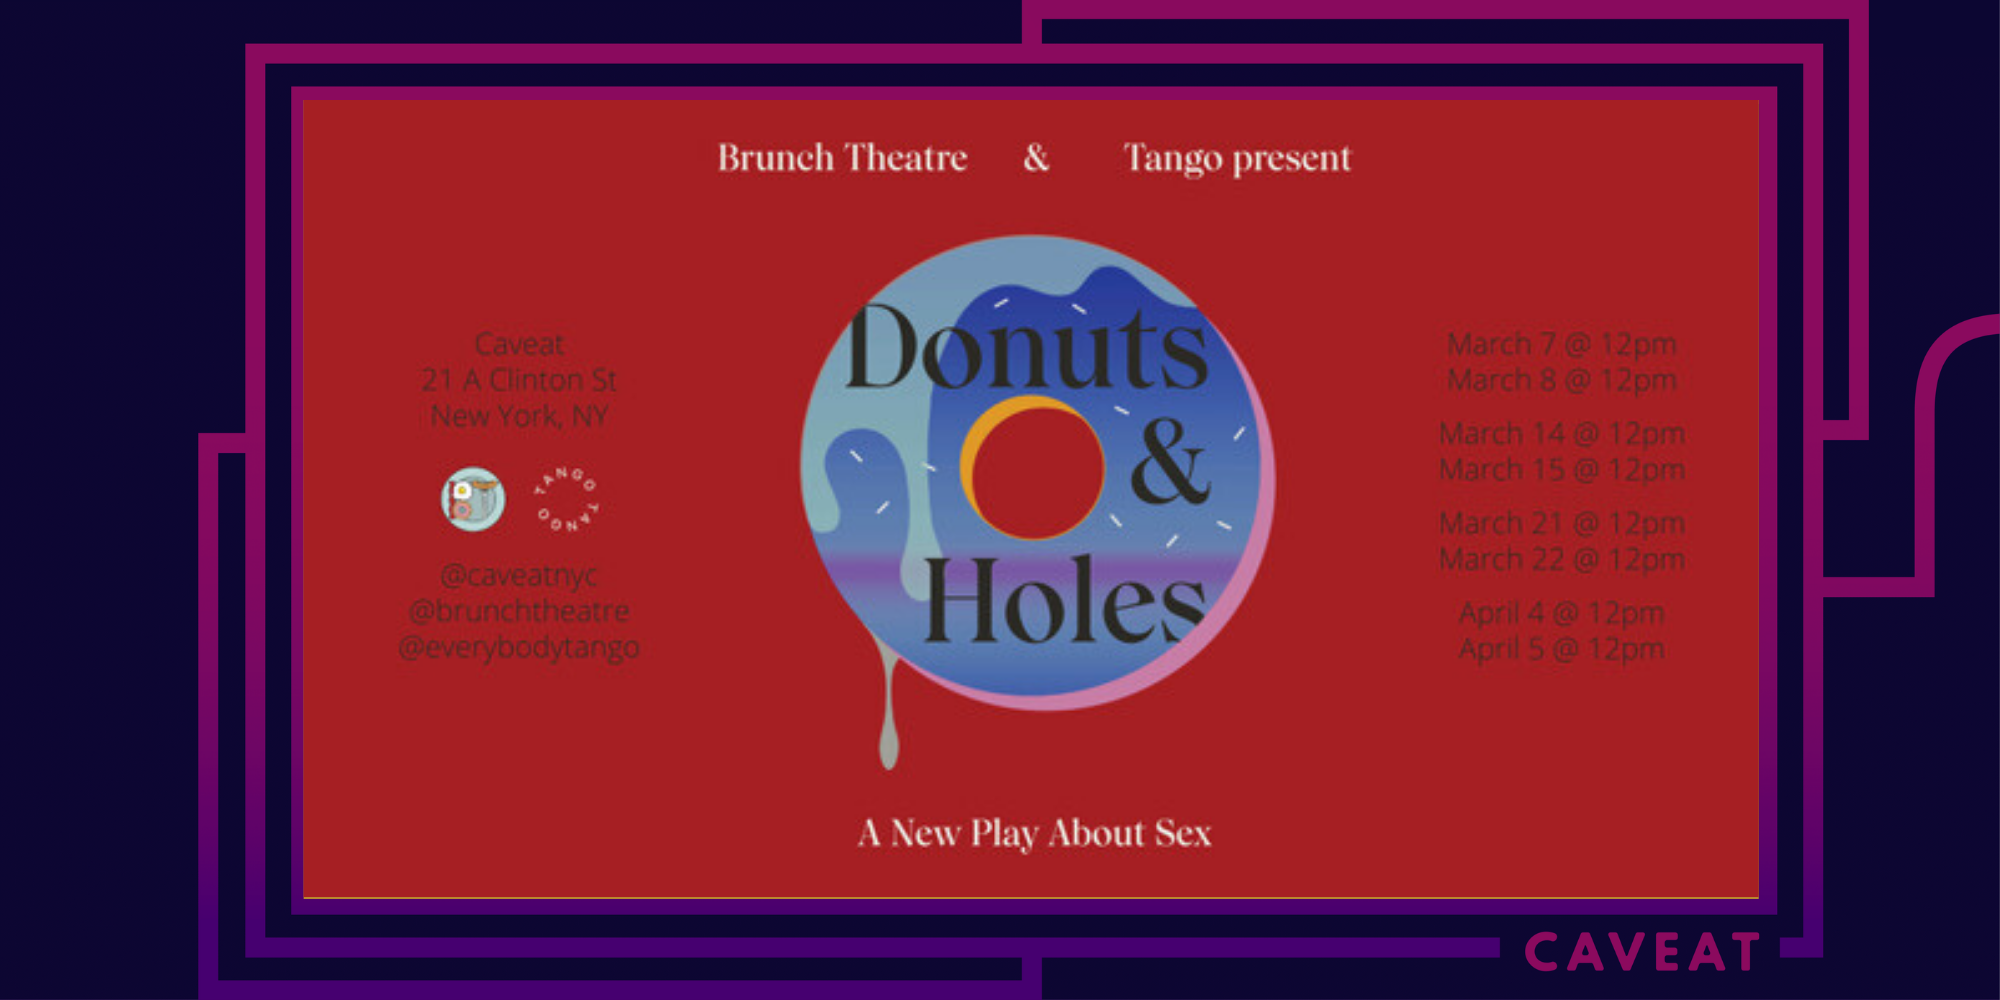 BRUNCH THEATRE: Donuts & Holes